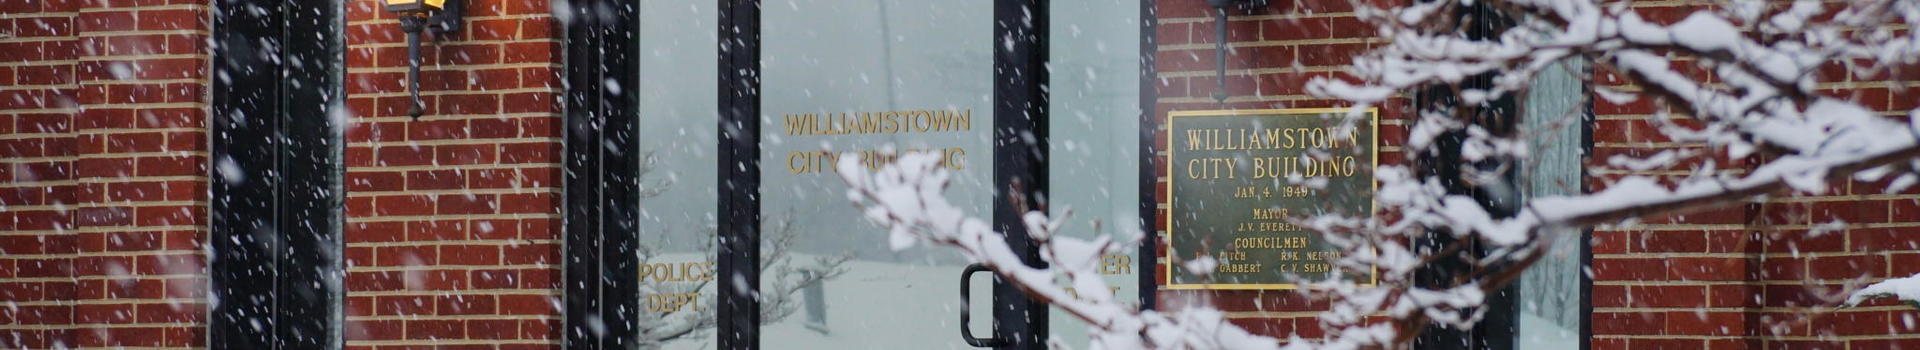 Williamstown City Building